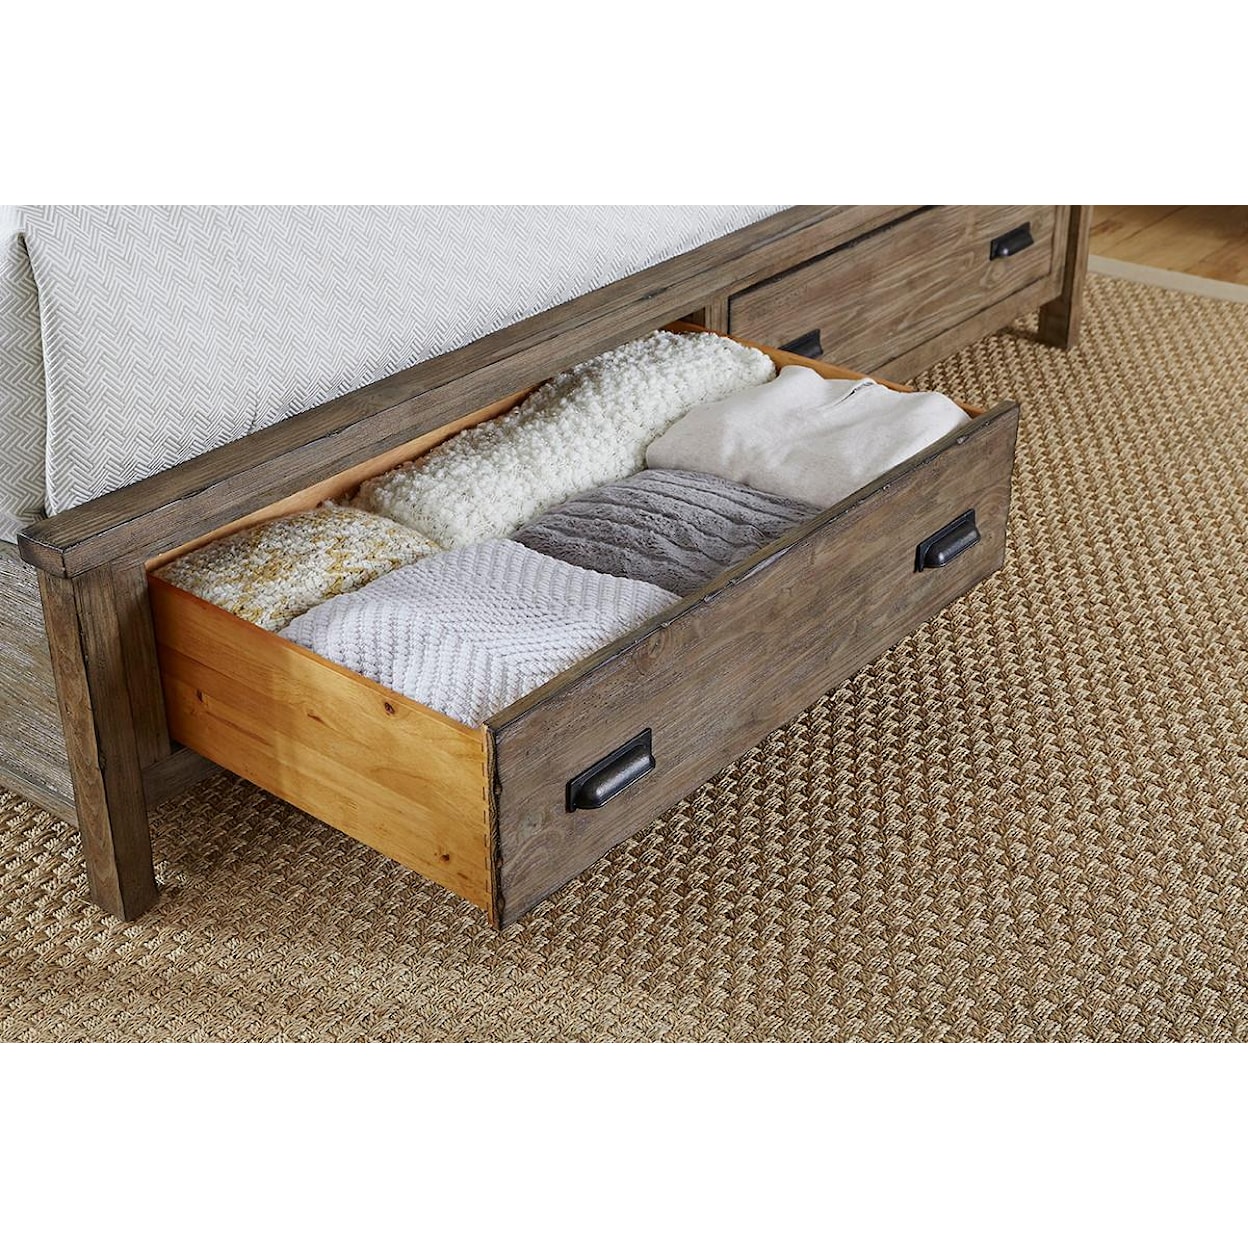 Kincaid Furniture Foundry Queen Panel Bed with Storage Footboard